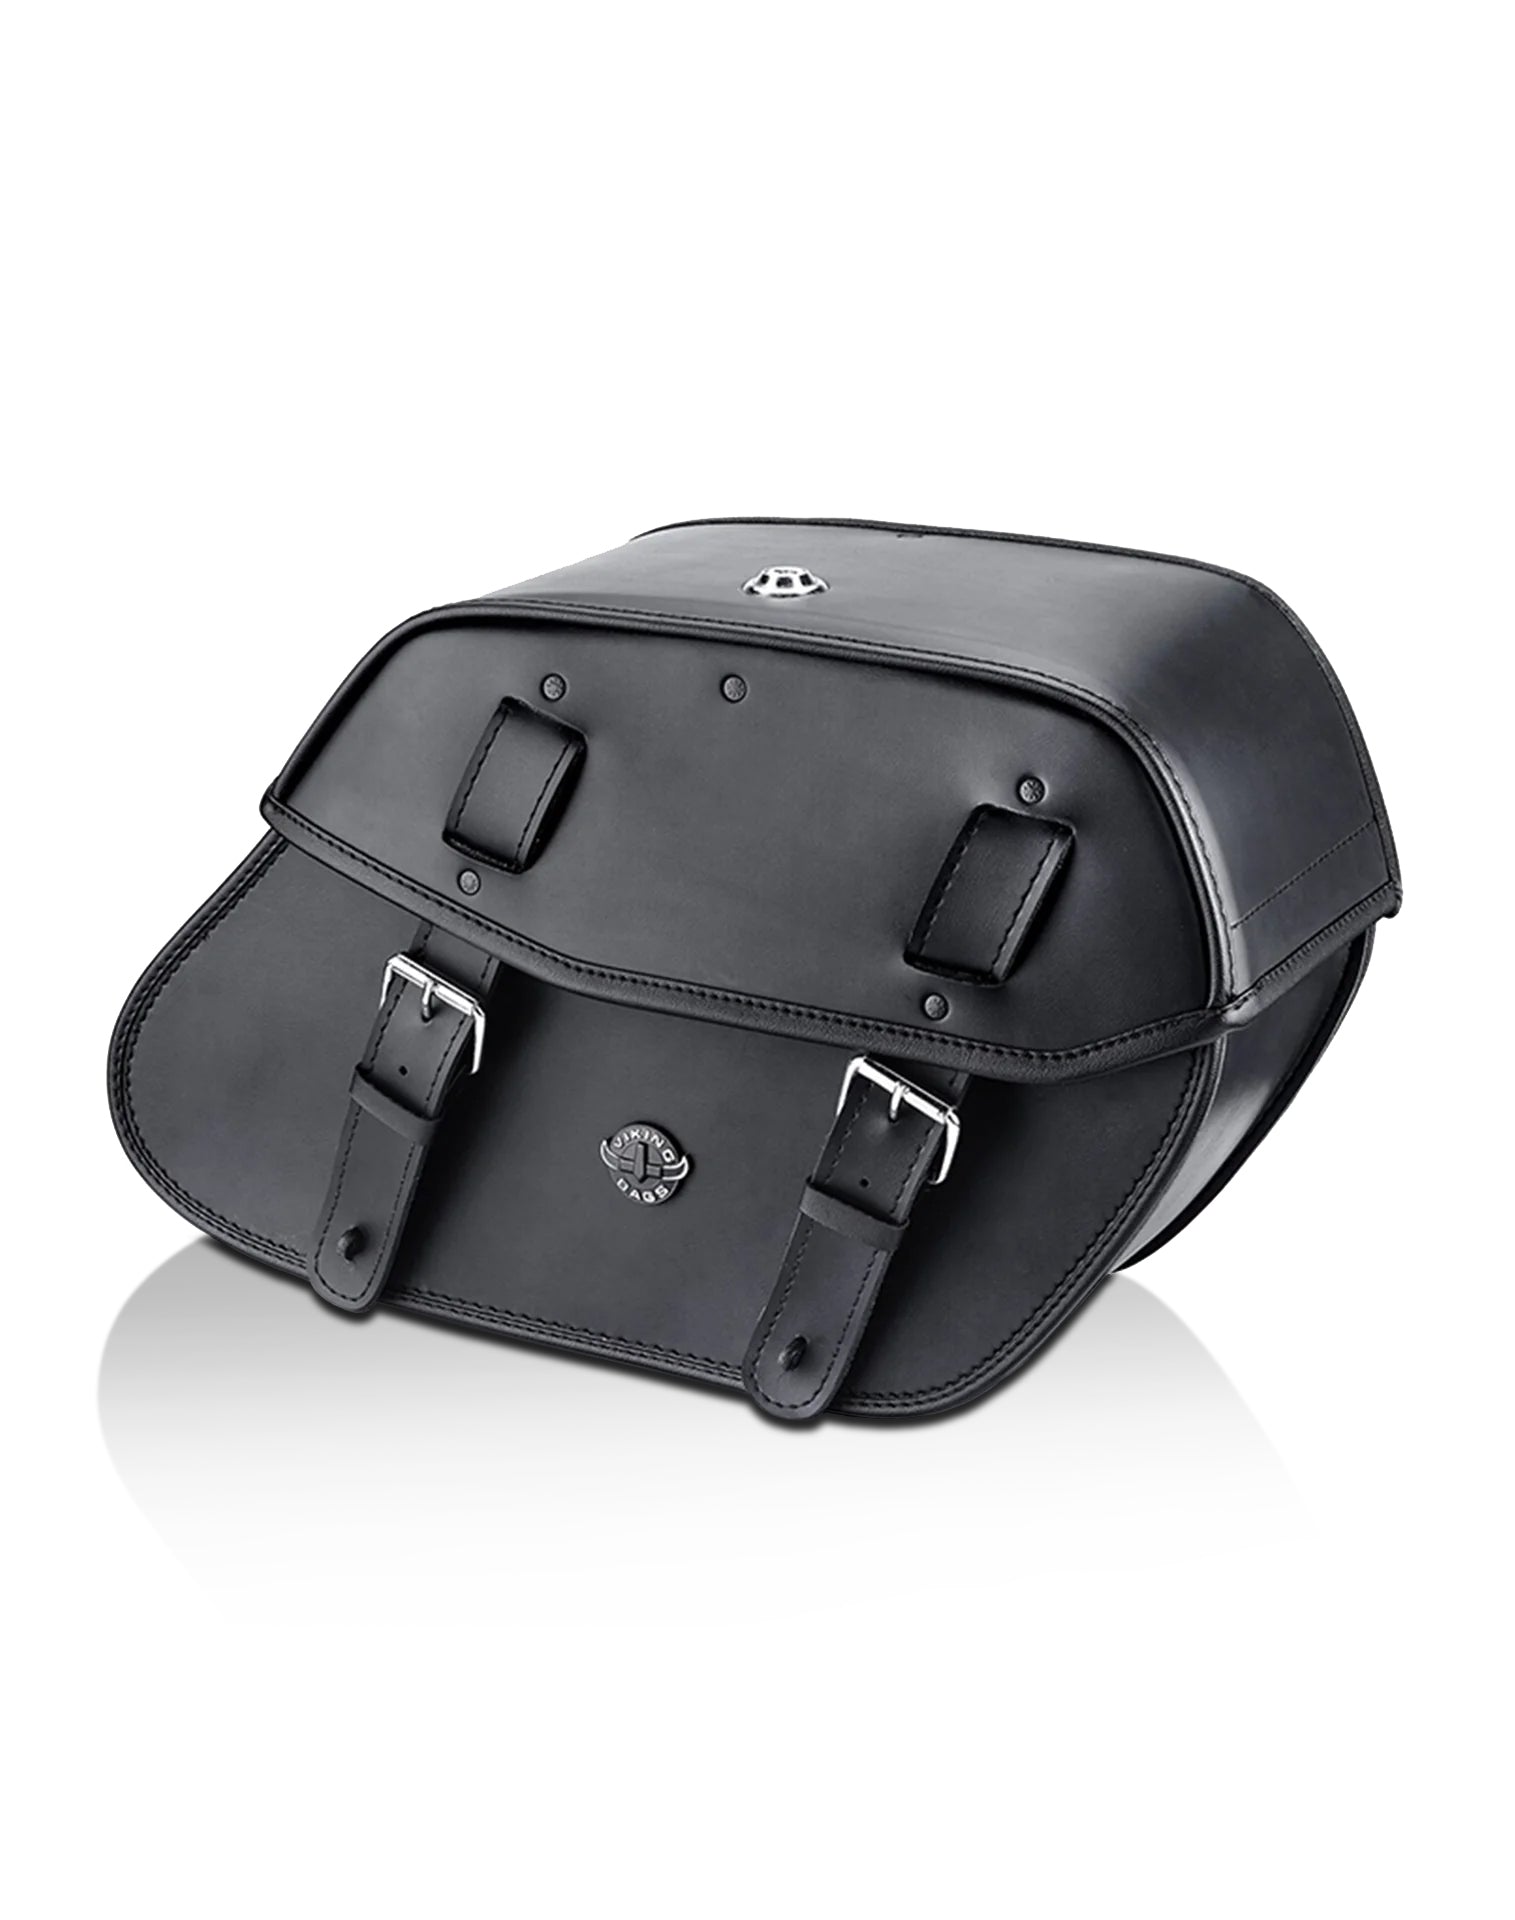 Viking Odin Large Leather Motorcycle Saddlebags For Harley Softail Street Bob Fxbb Main View